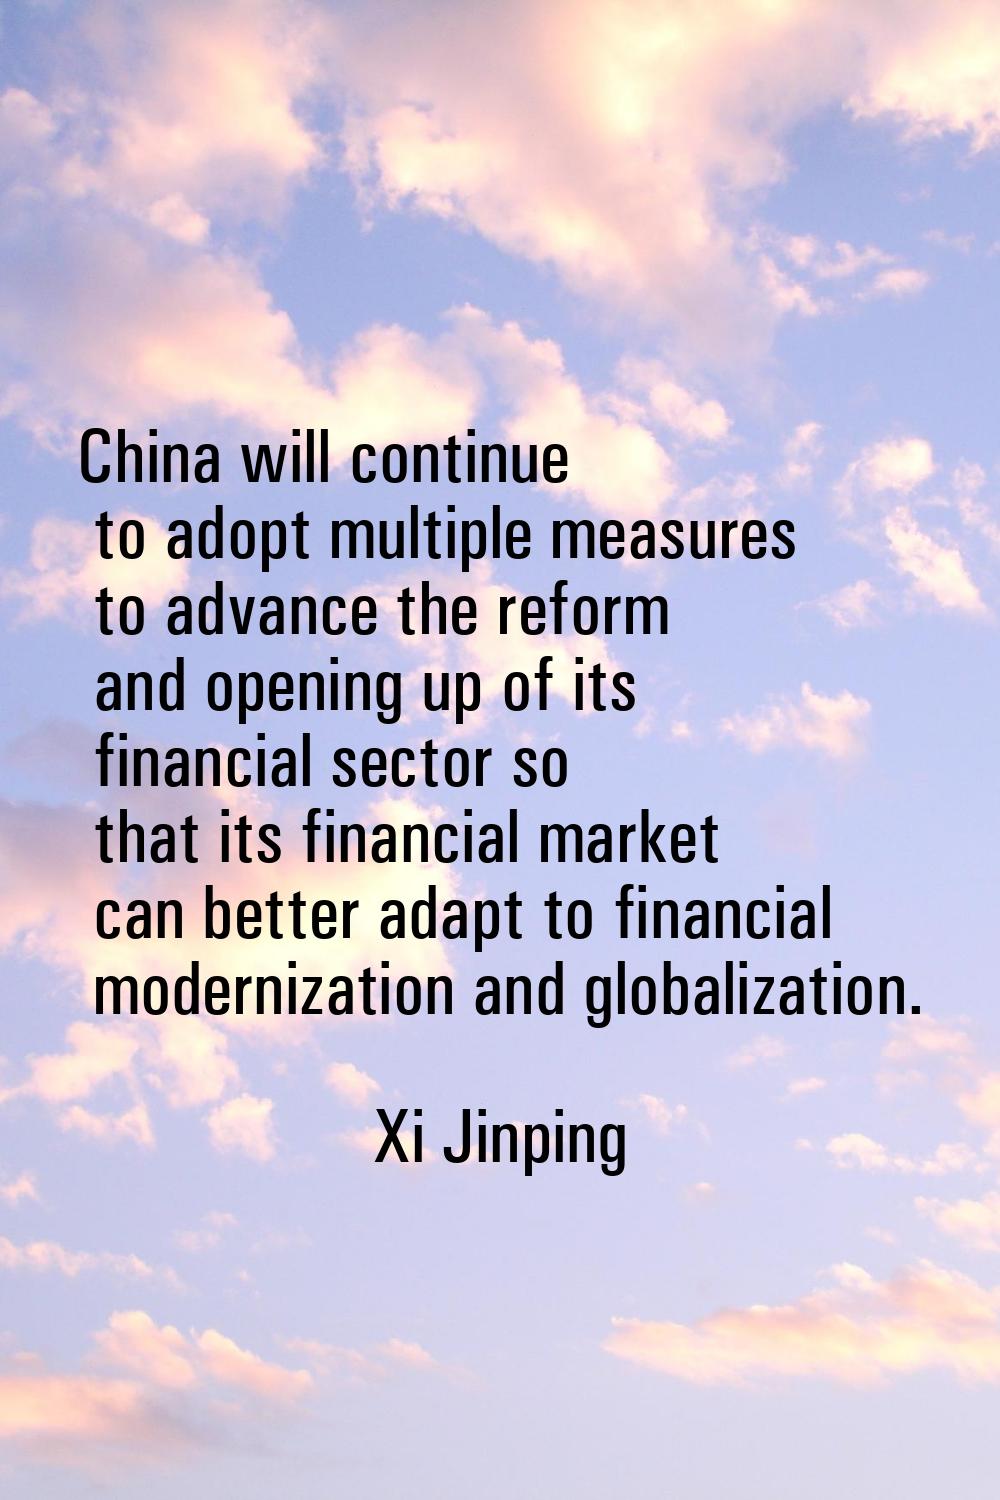 China will continue to adopt multiple measures to advance the reform and opening up of its financia